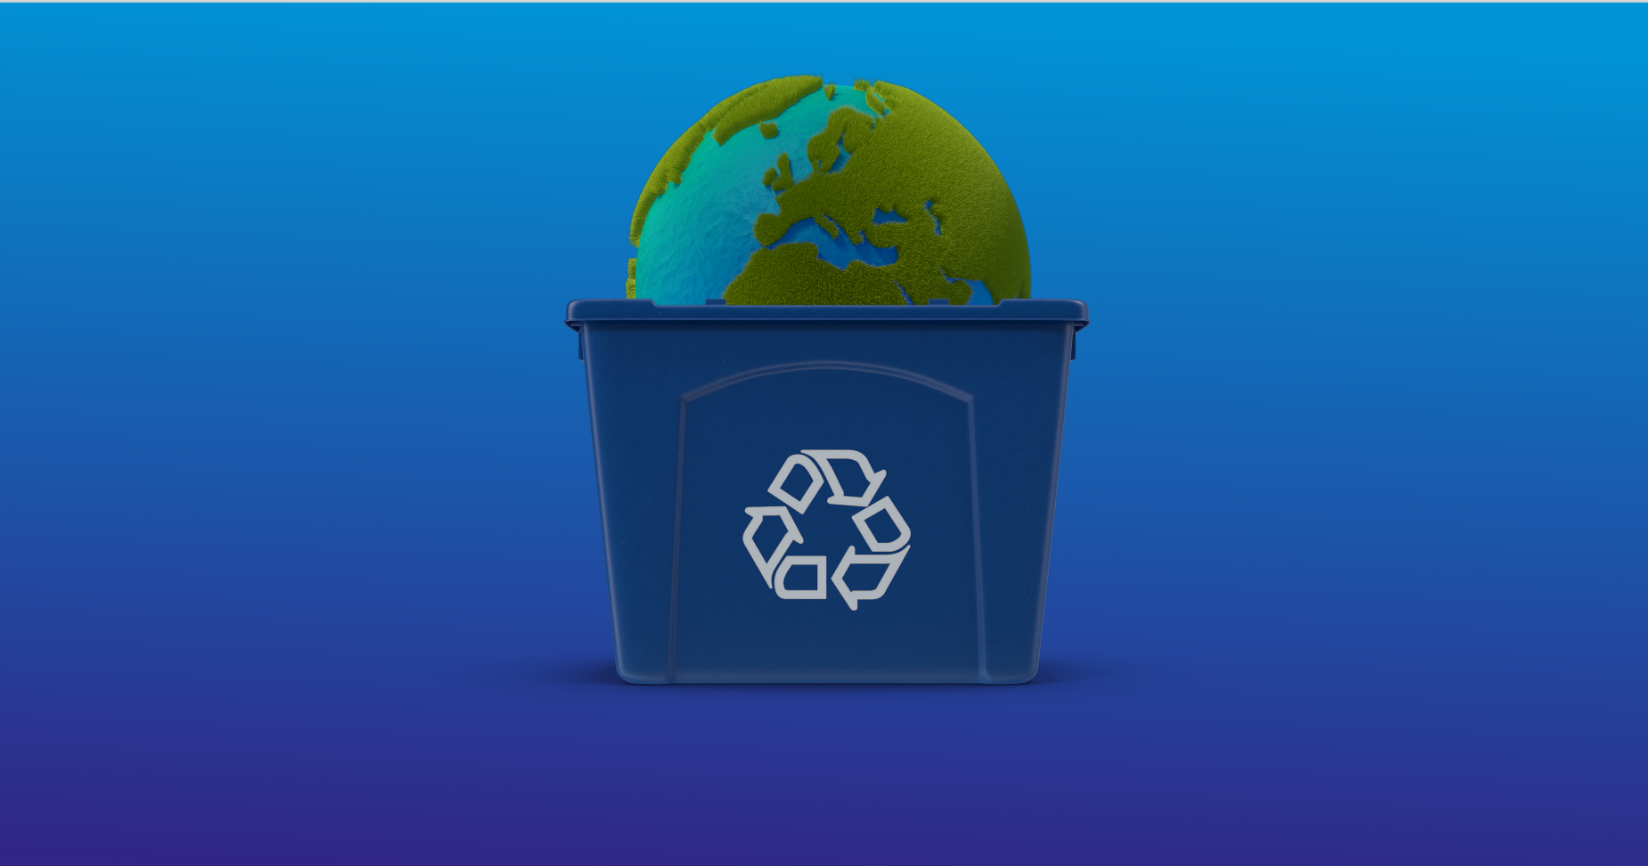 If you have to have waste, do you know the least environmentally harmful solution for it?